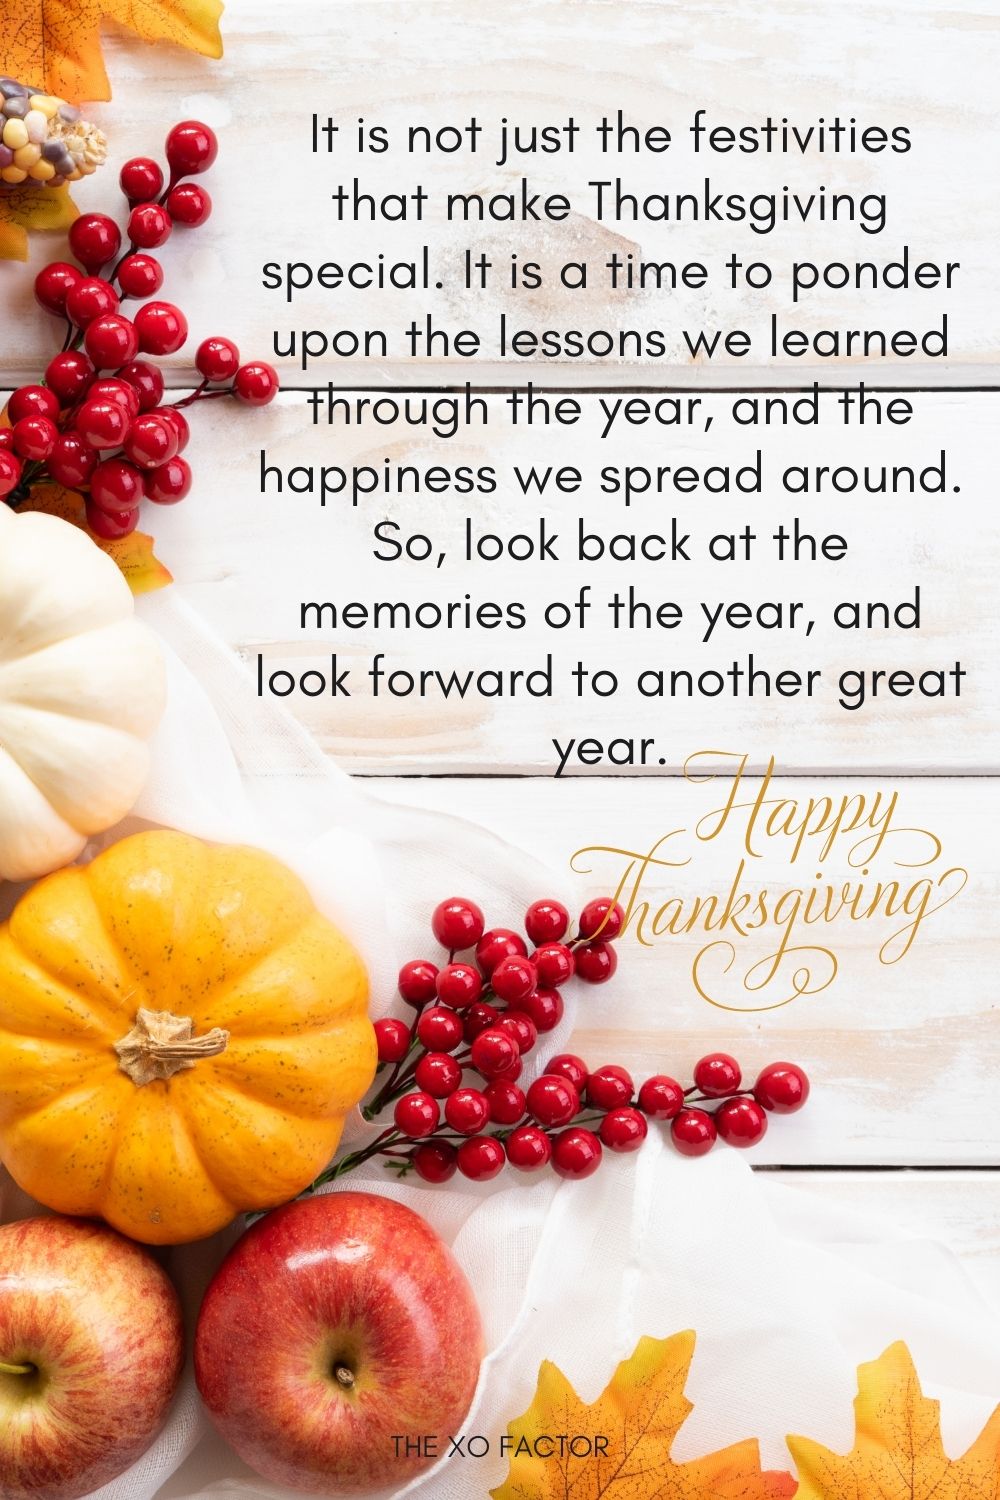 It is not just the festivities that make Thanksgiving special. It is a time to ponder upon the lessons we learned through the year, and the happiness we spread around. So, look back at the memories of the year, and look forward to another great year.